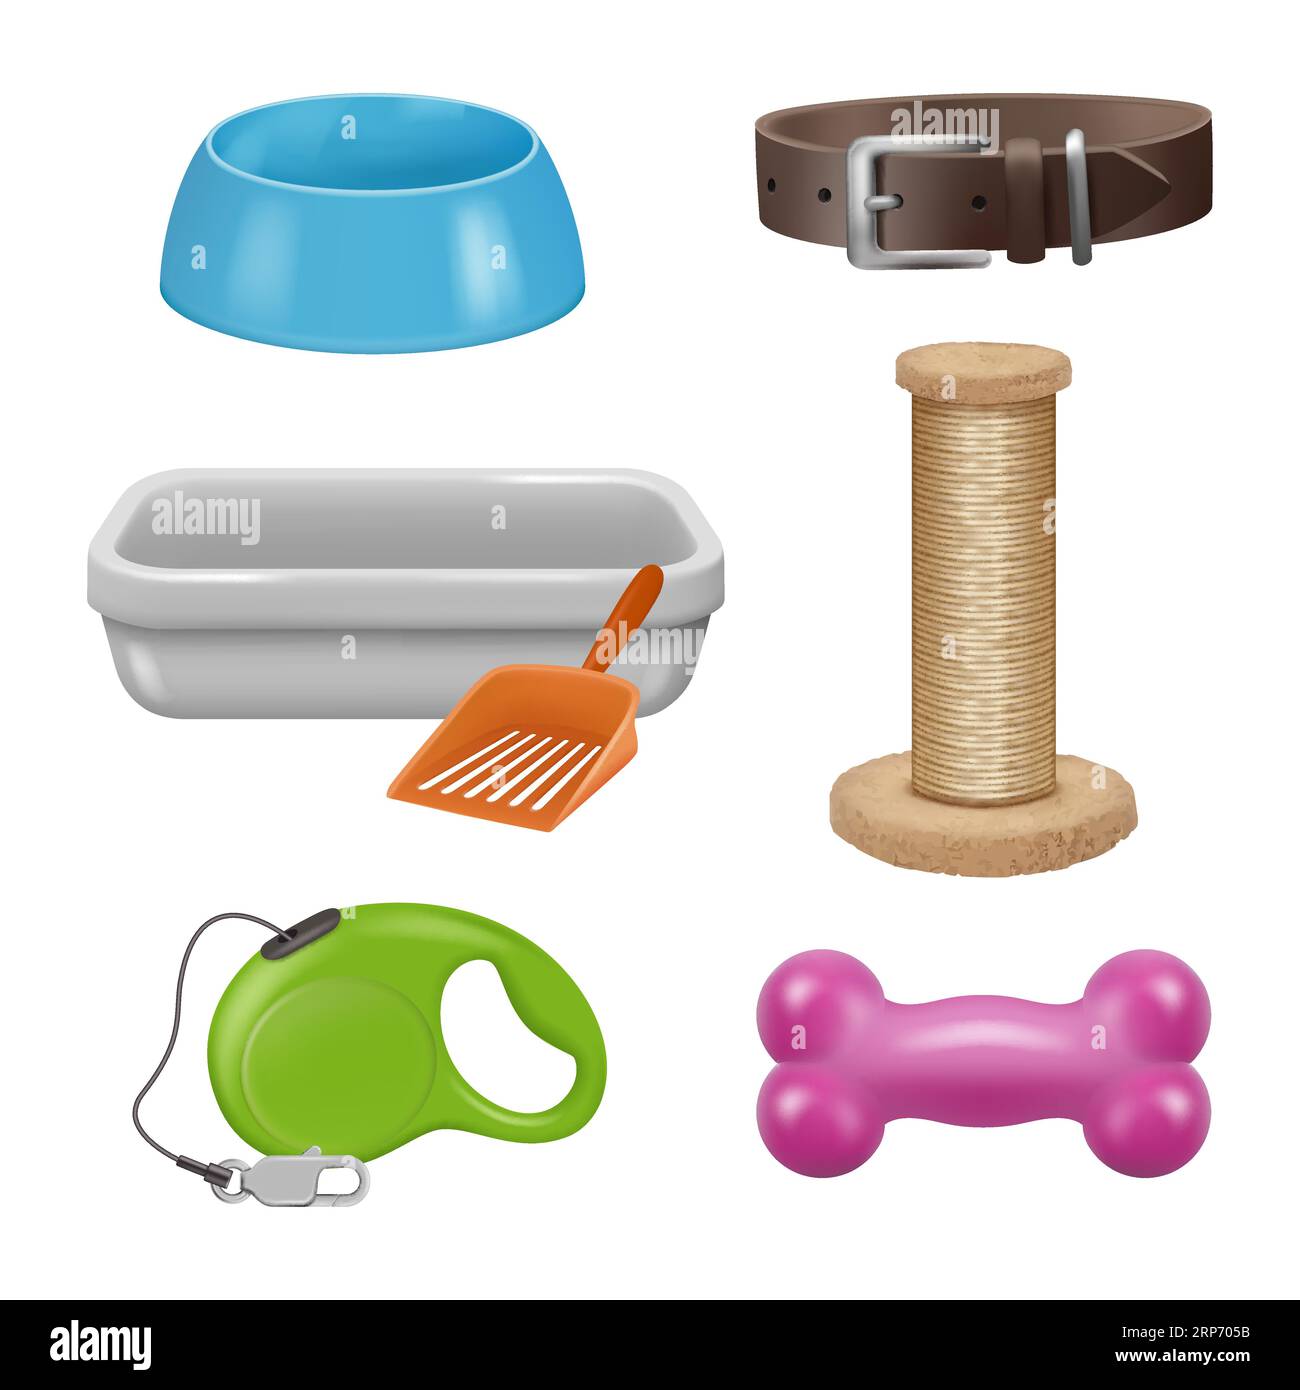 Rubber grooming tool Stock Vector Images - Alamy